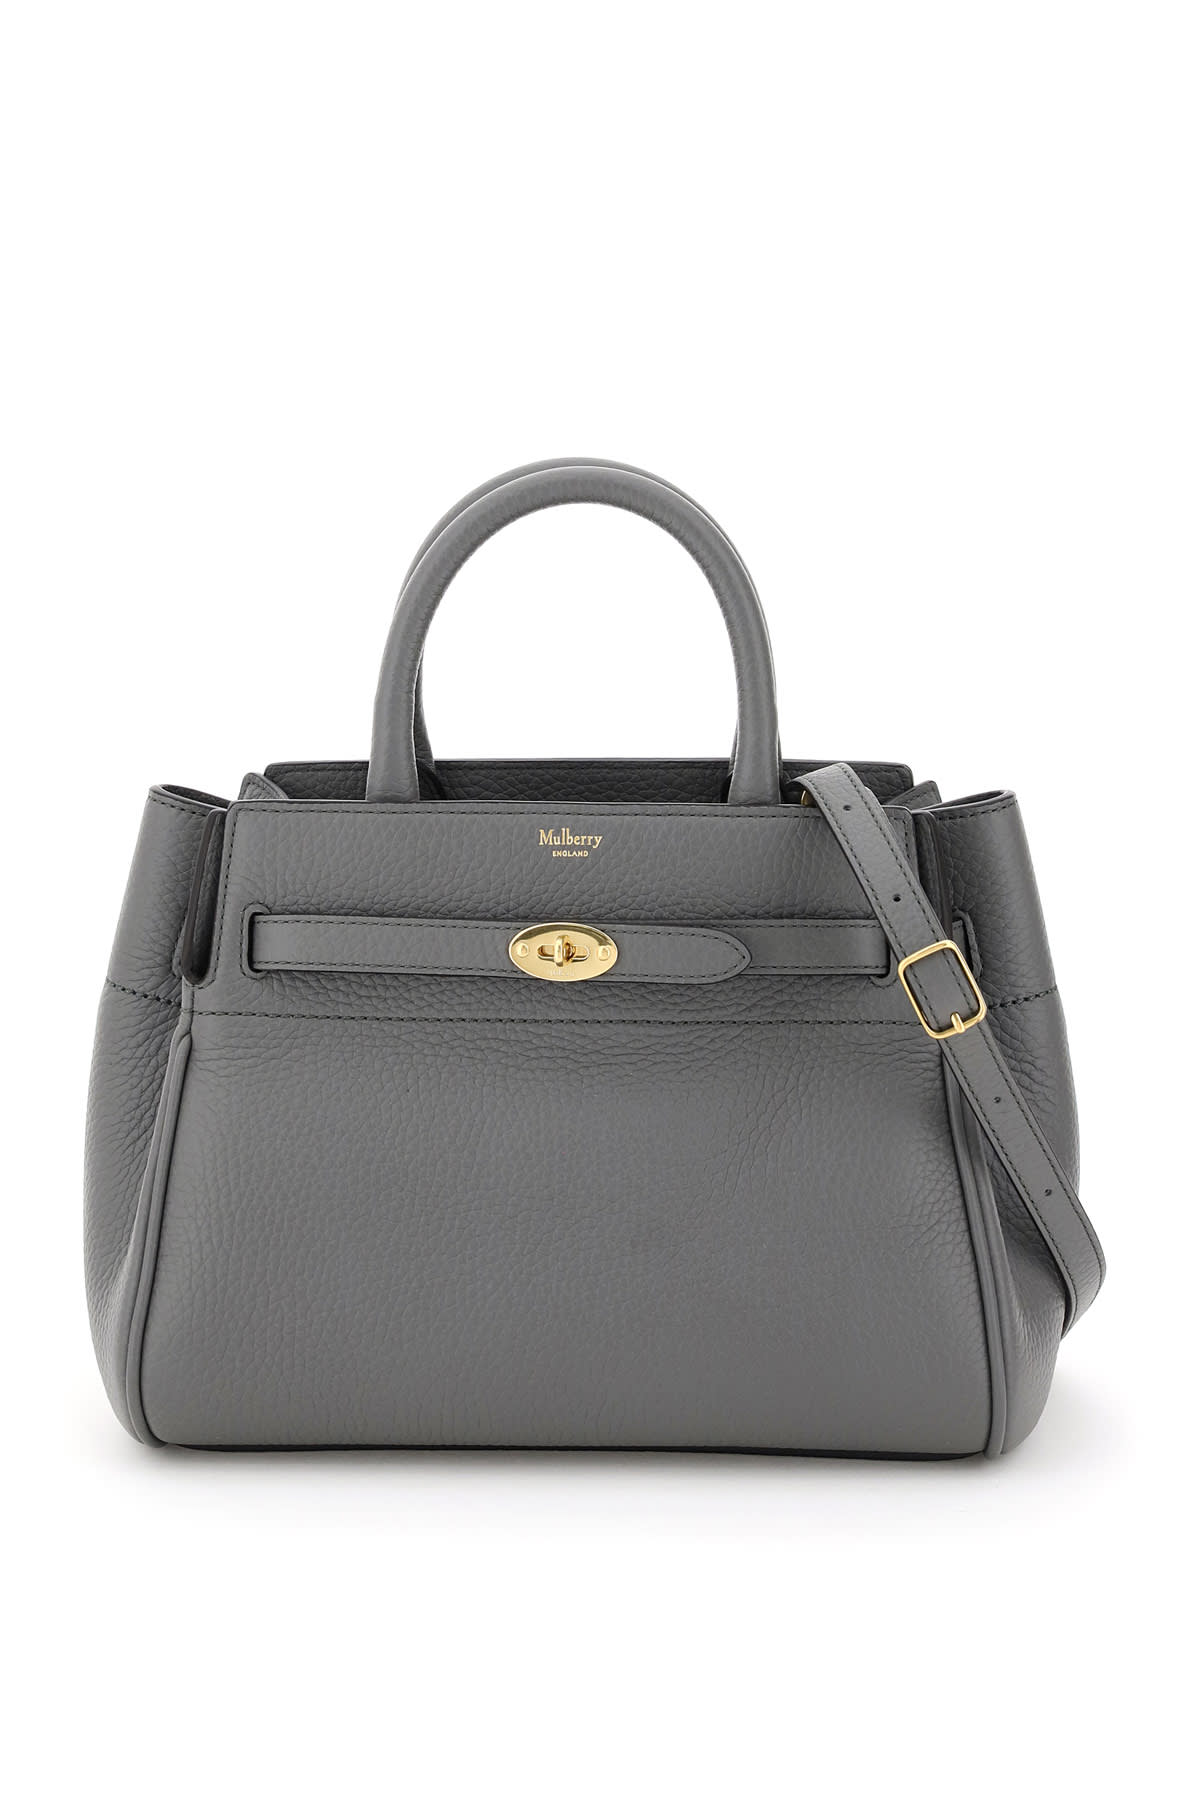 Mulberry BELTED BAYSWATER SMALL BAG